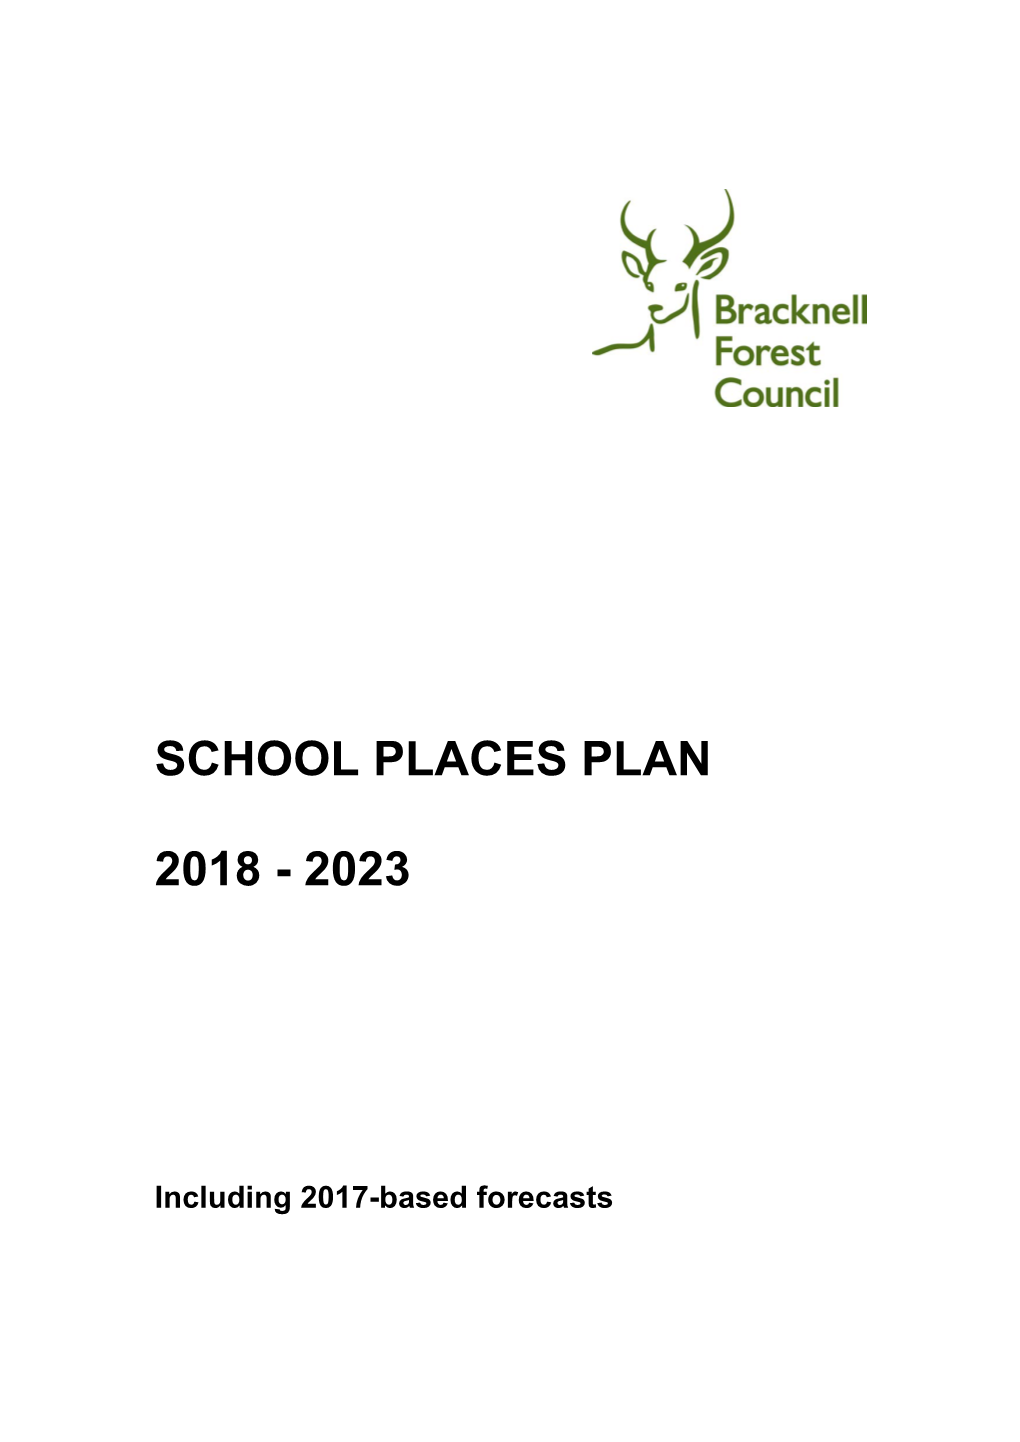 School Places Plan 2018 to 2023